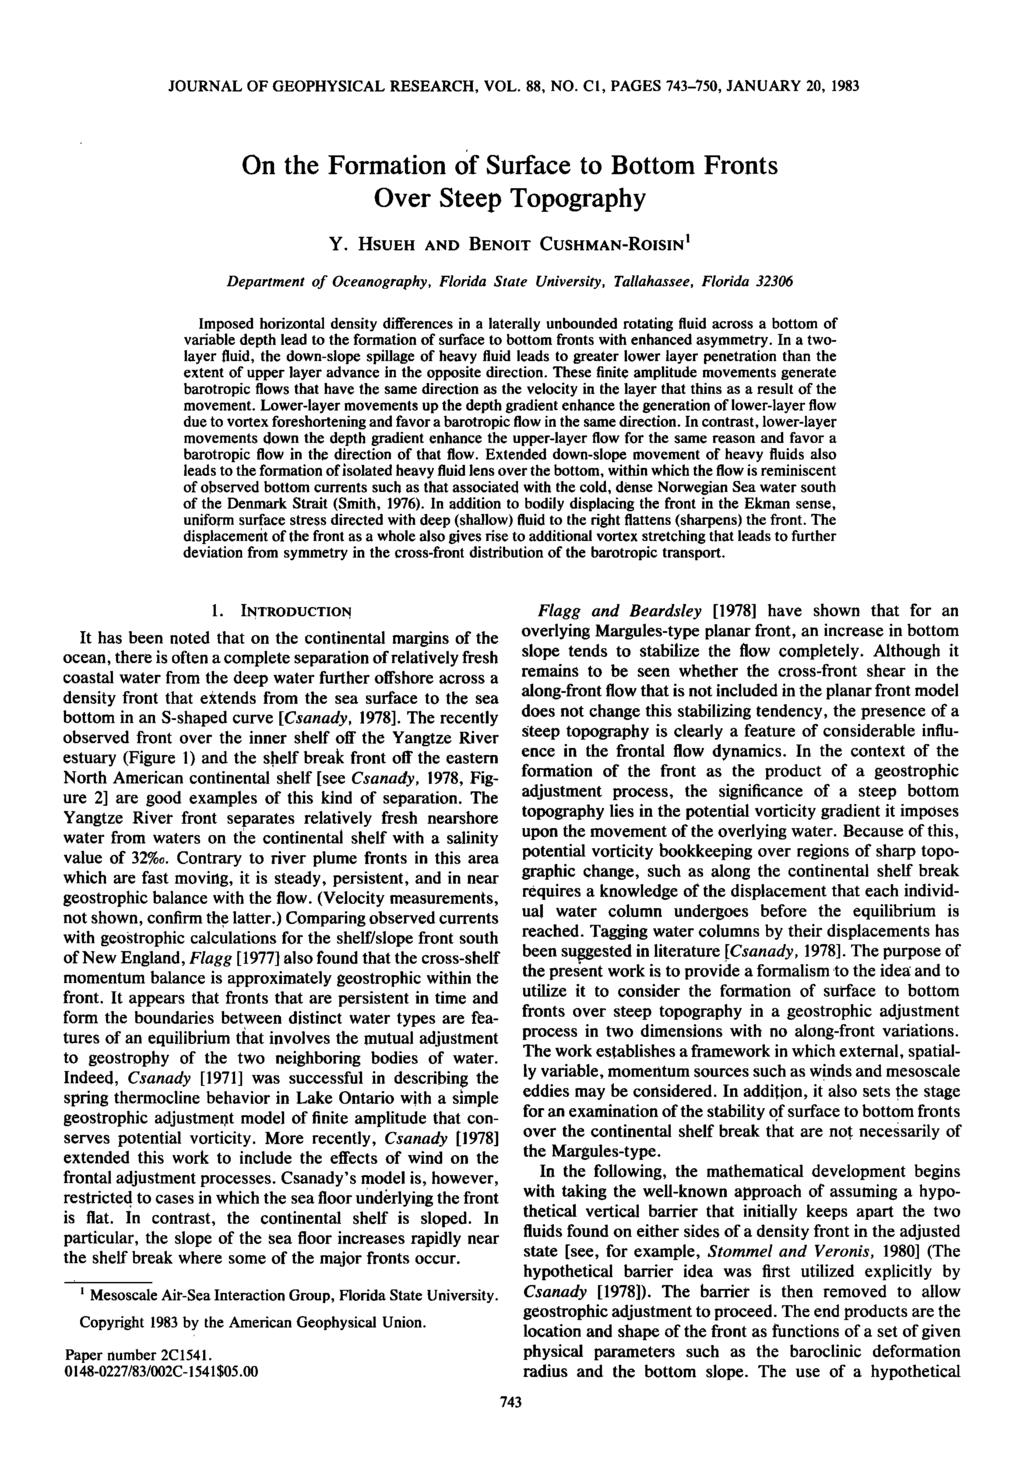 JOURNAL OF GEOPHYSCAL RESEARCH, VOL. 88, NO. C1, PAGES 743-750, JANUARY 20, 1983 On the Formaton of Surface to Bottom Fronts Over Steep Topography Y. HSUEH AND BENOT CUSHMAN-ROSN!